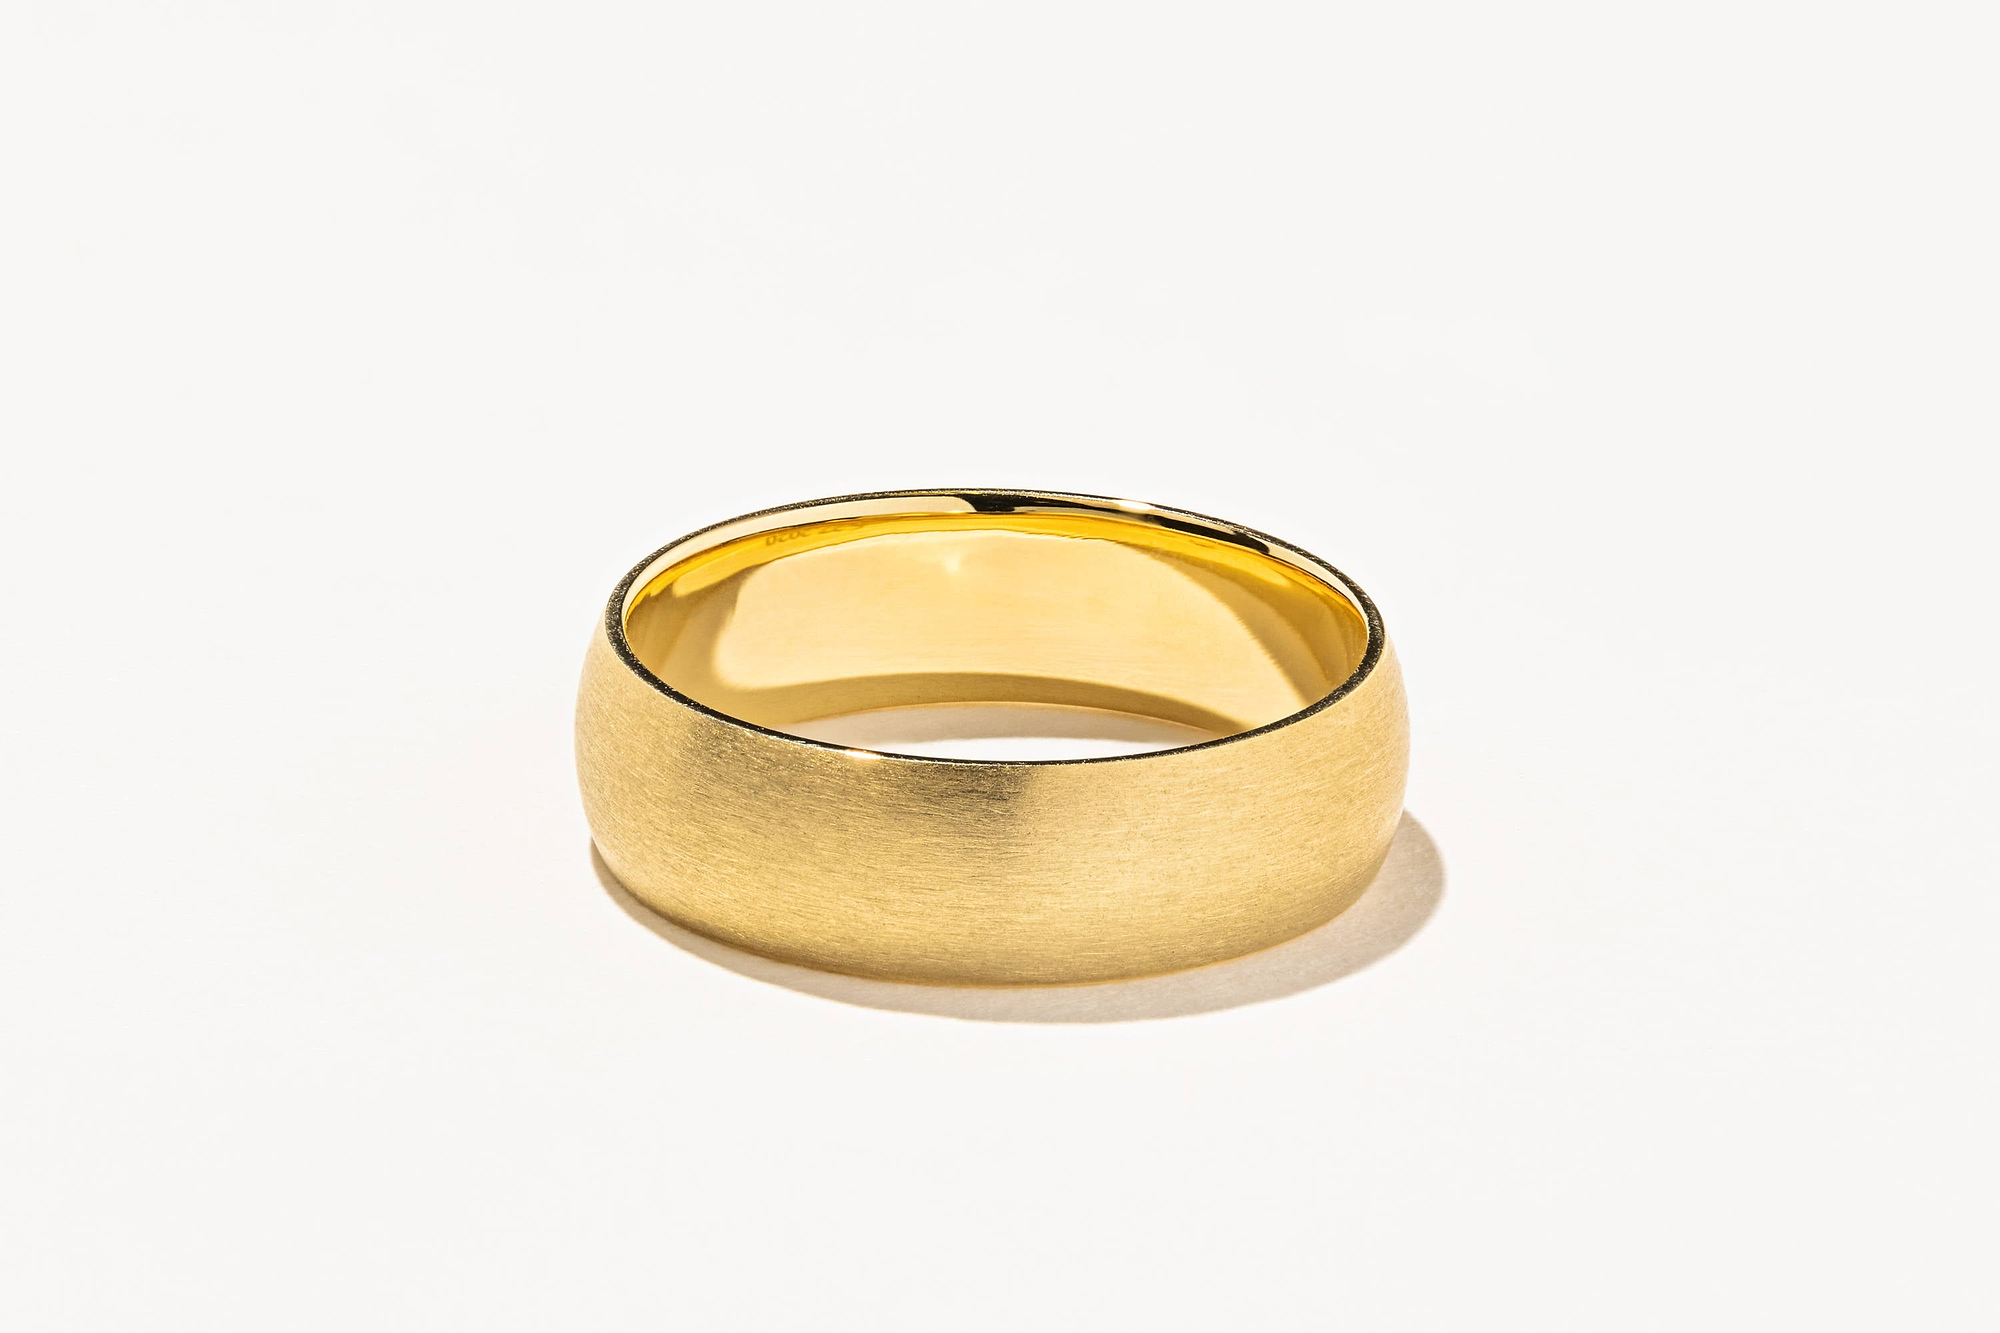 Top 5 Men's Wedding Band Finishes